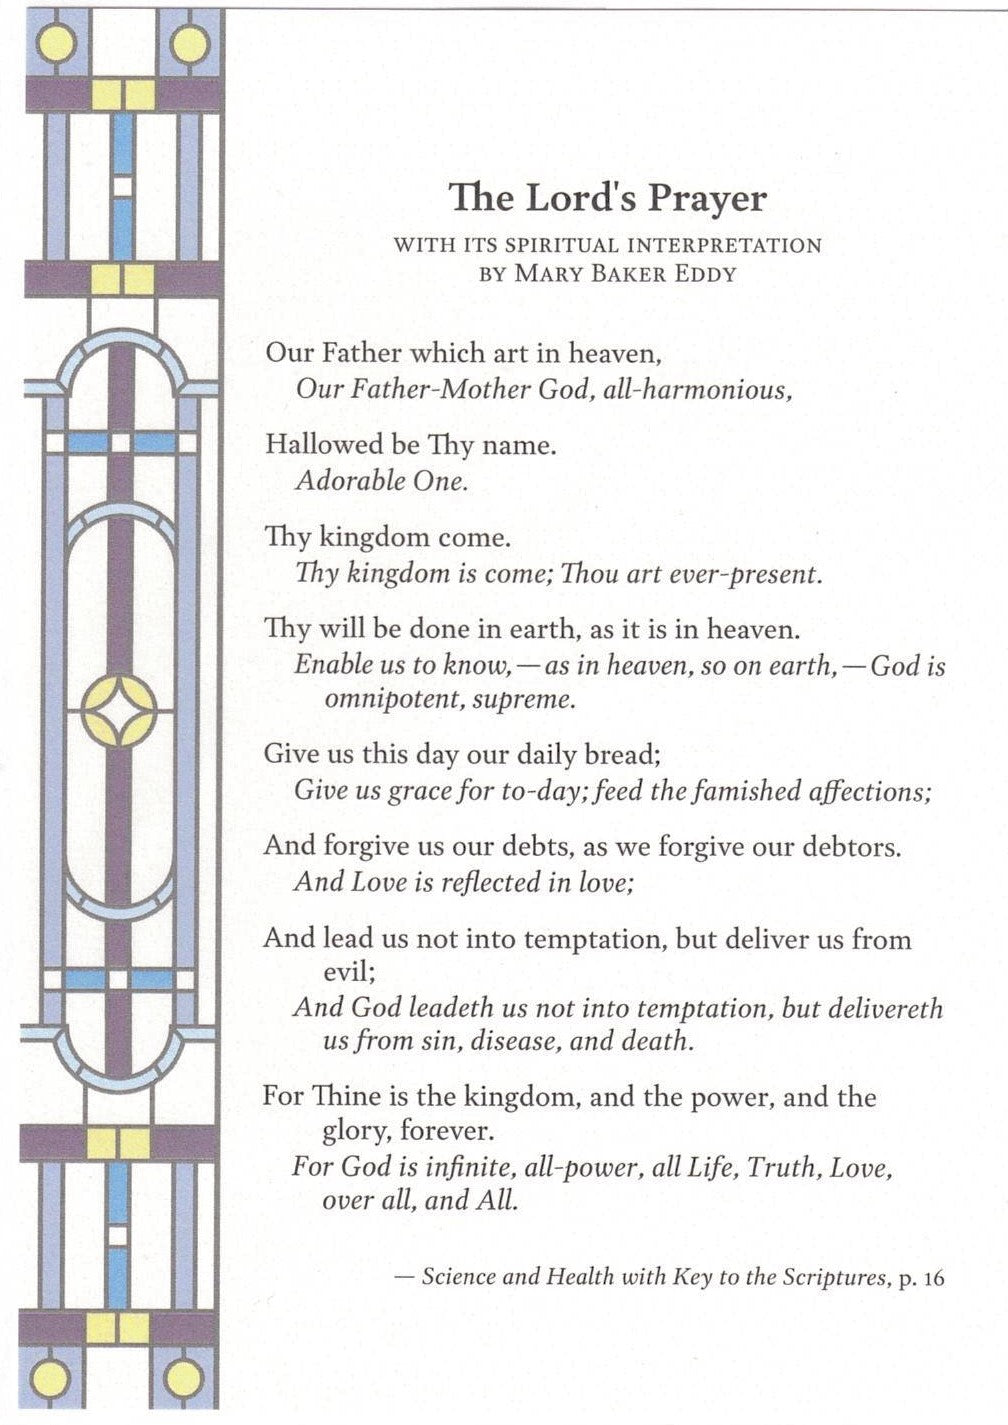 The Lord's Prayer (with its spiritual interpretation by Mary Baker Eddy) - card